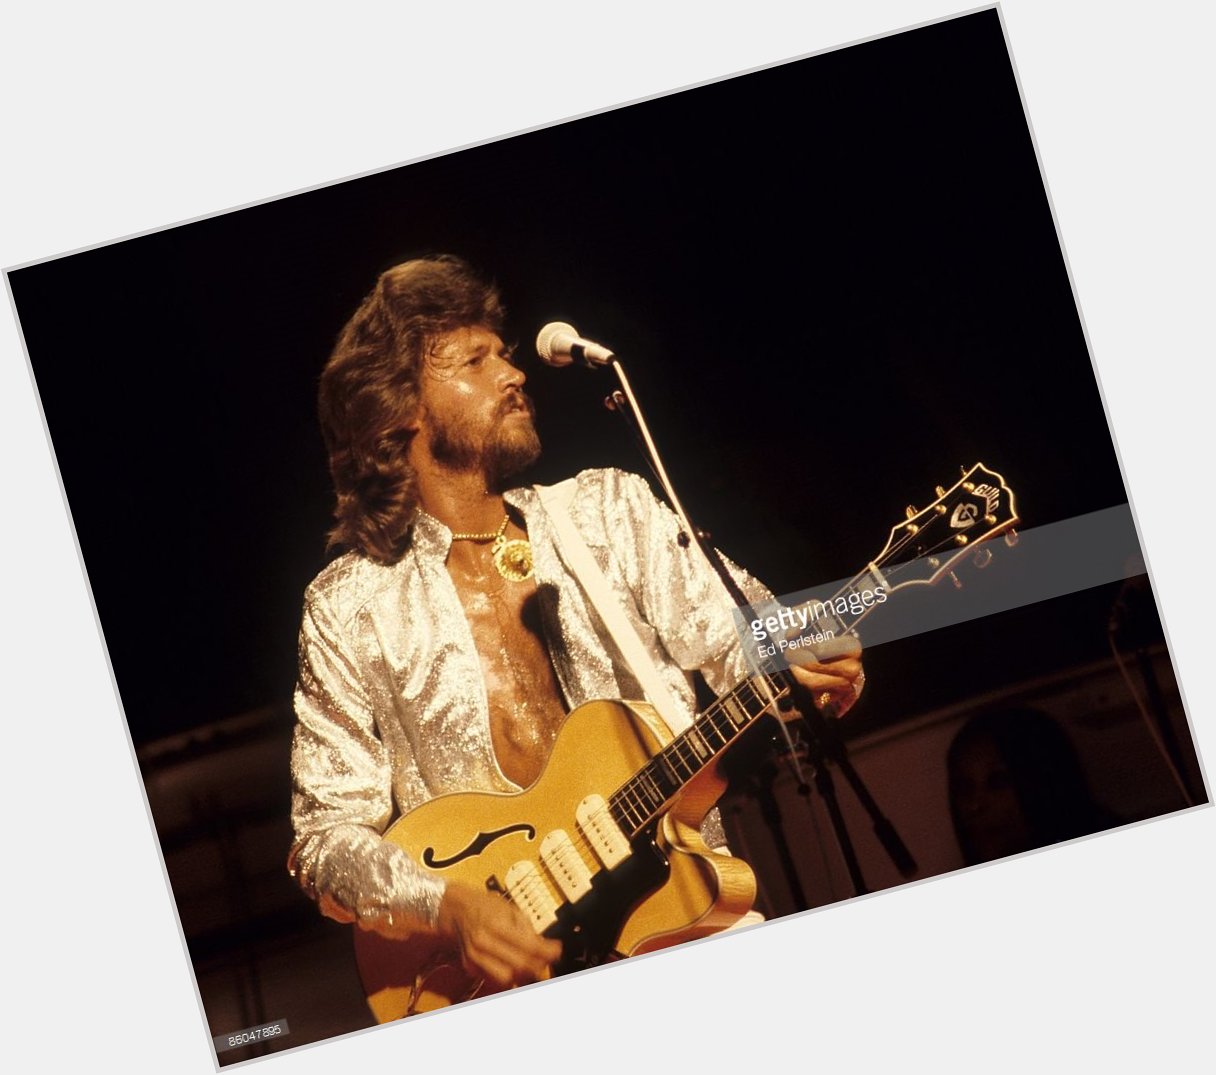 Barry Gibb is 71 years old today. He was born on 1 September 1946 Happy birthday Barry!  